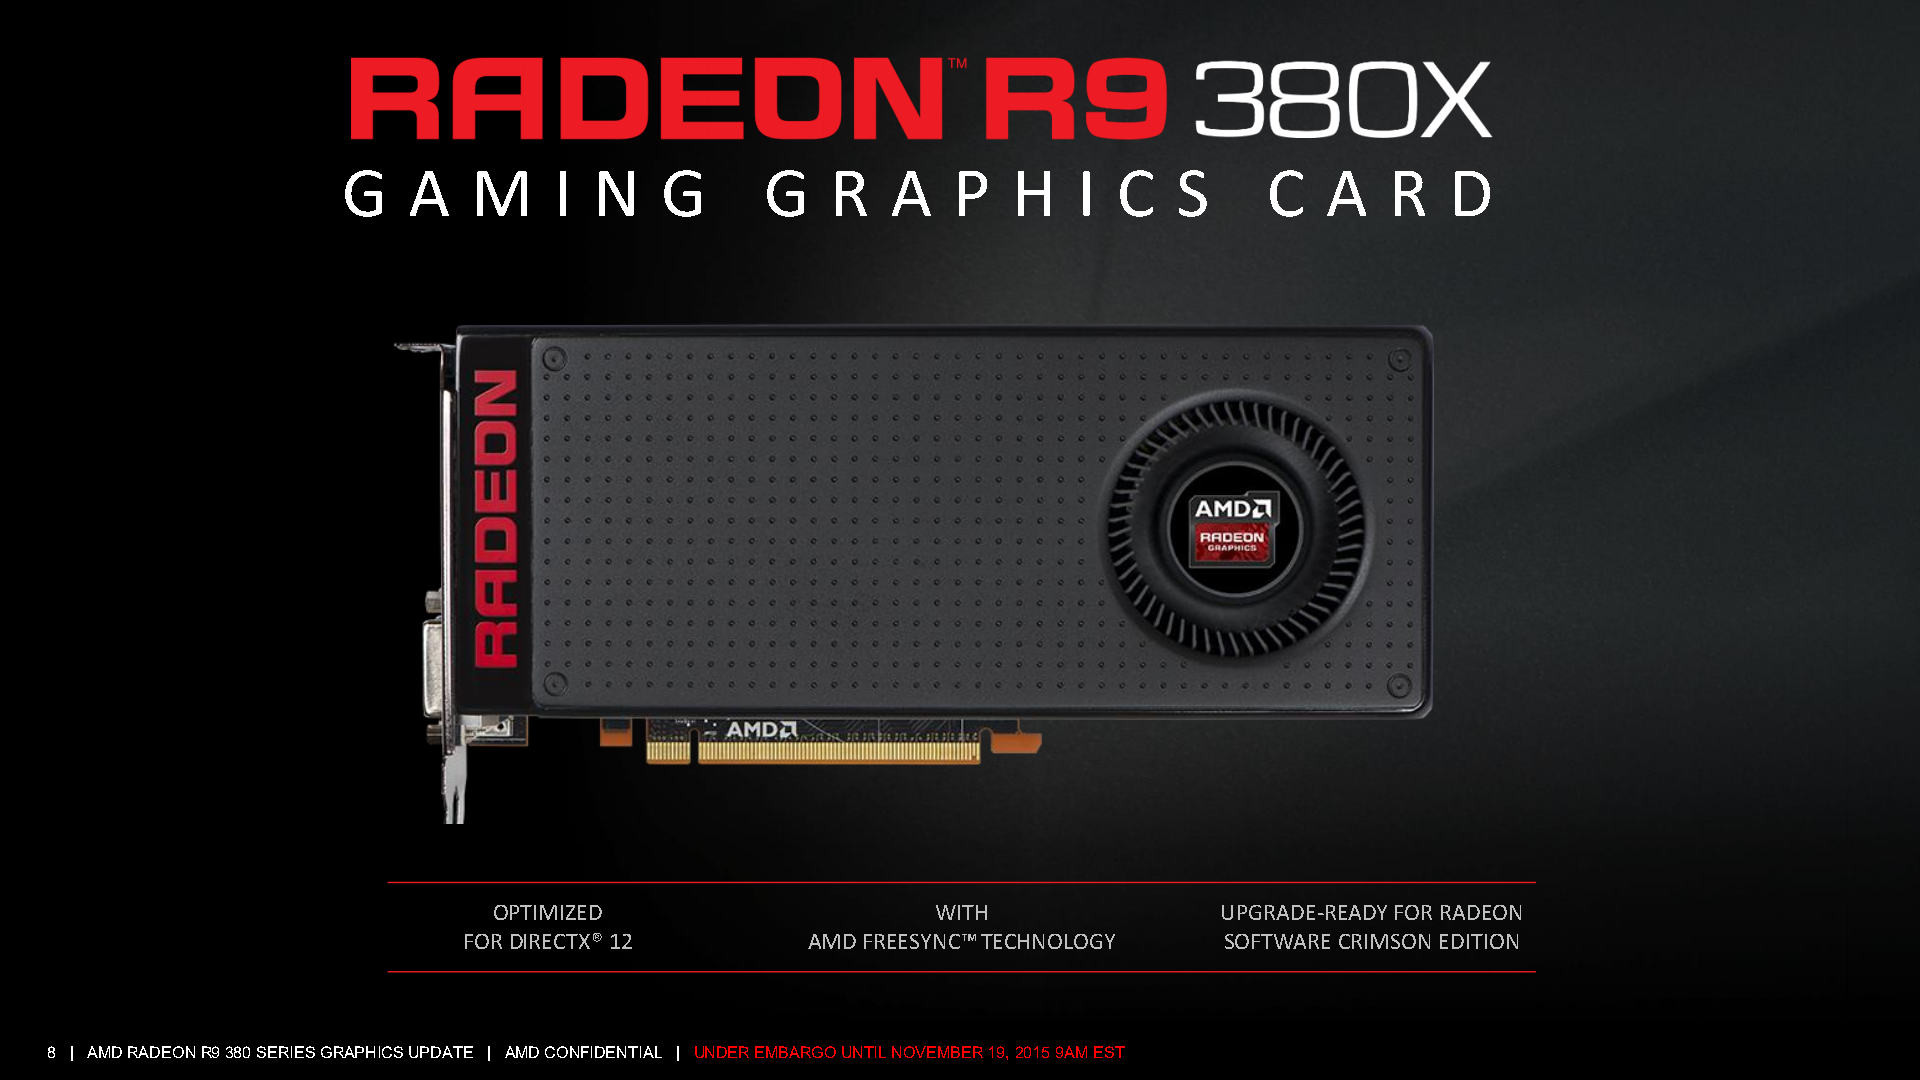 1920x1080 Amd Crossfire Wallpaper Pictures to Pin on Pinterest - PinsDaddy